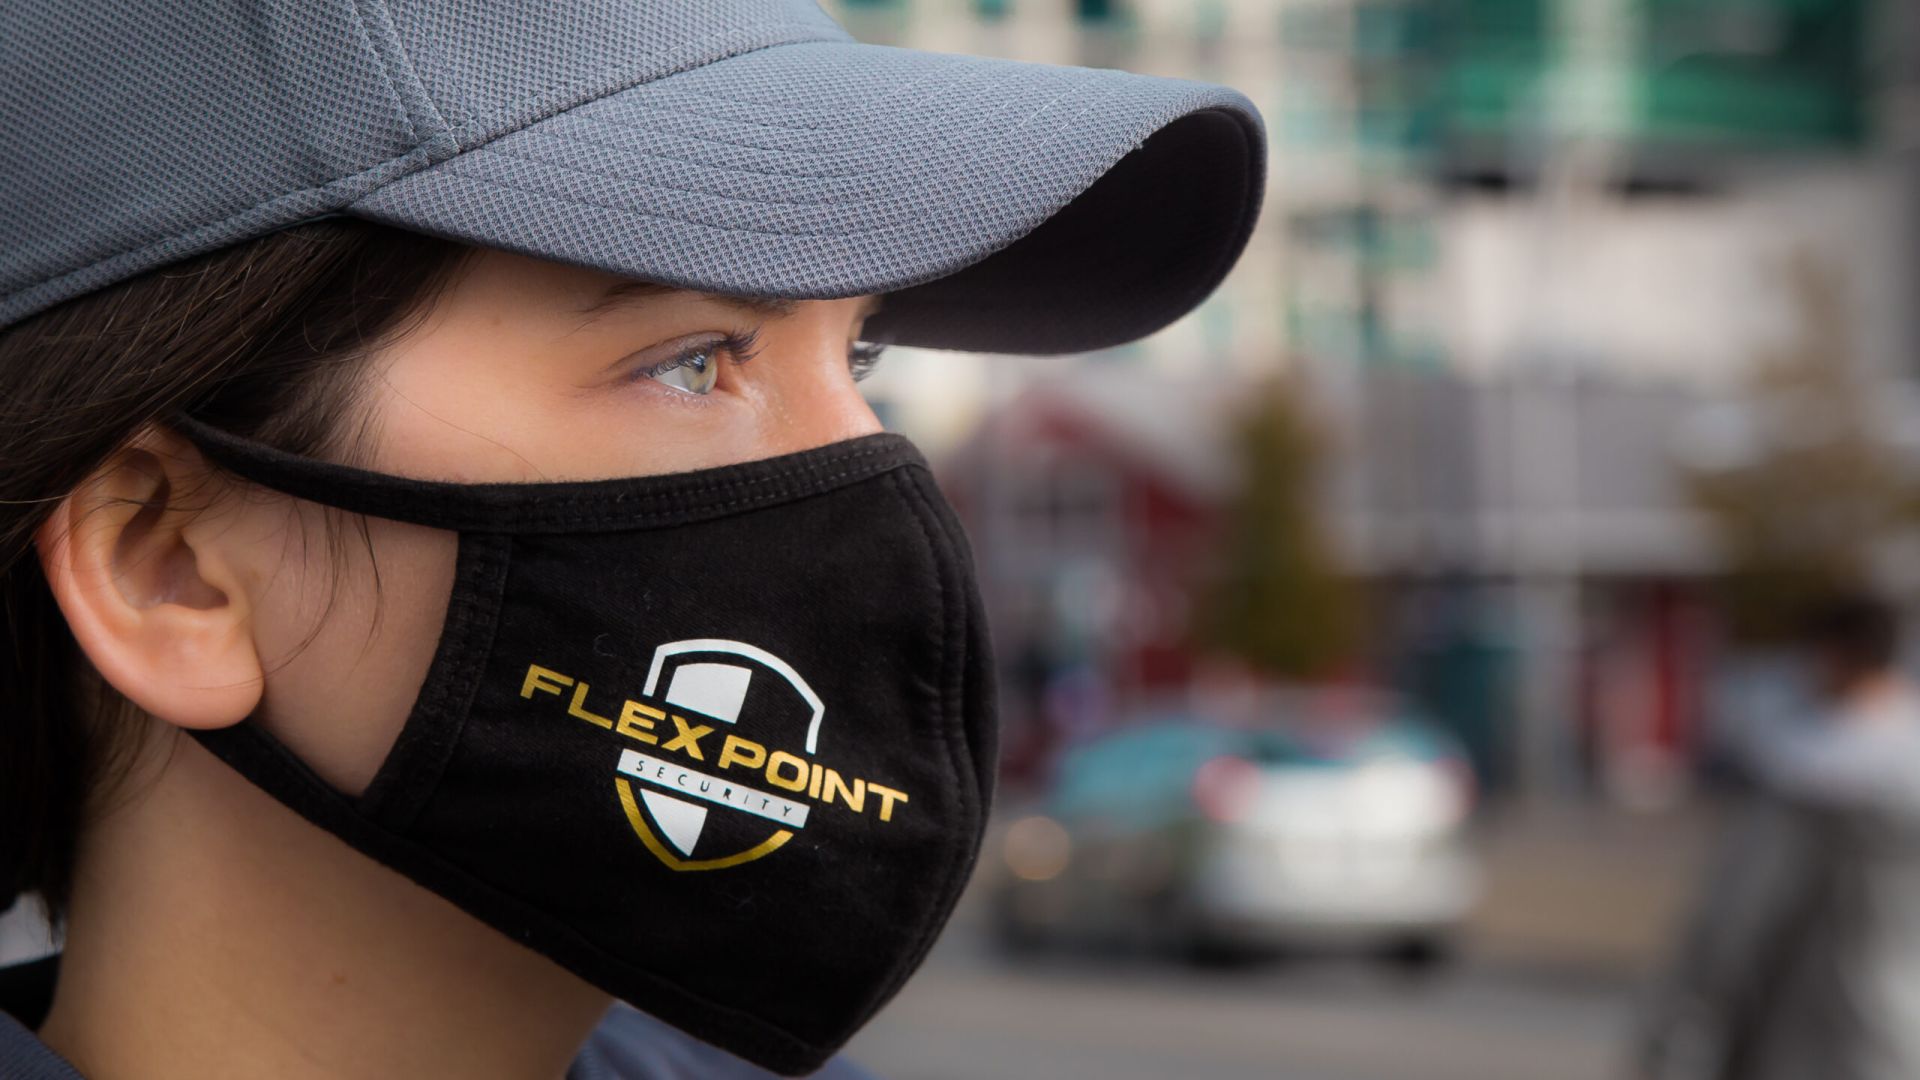 Close up of a female Flex Point Security guard's head as she wears a branded grey hat and black face mask